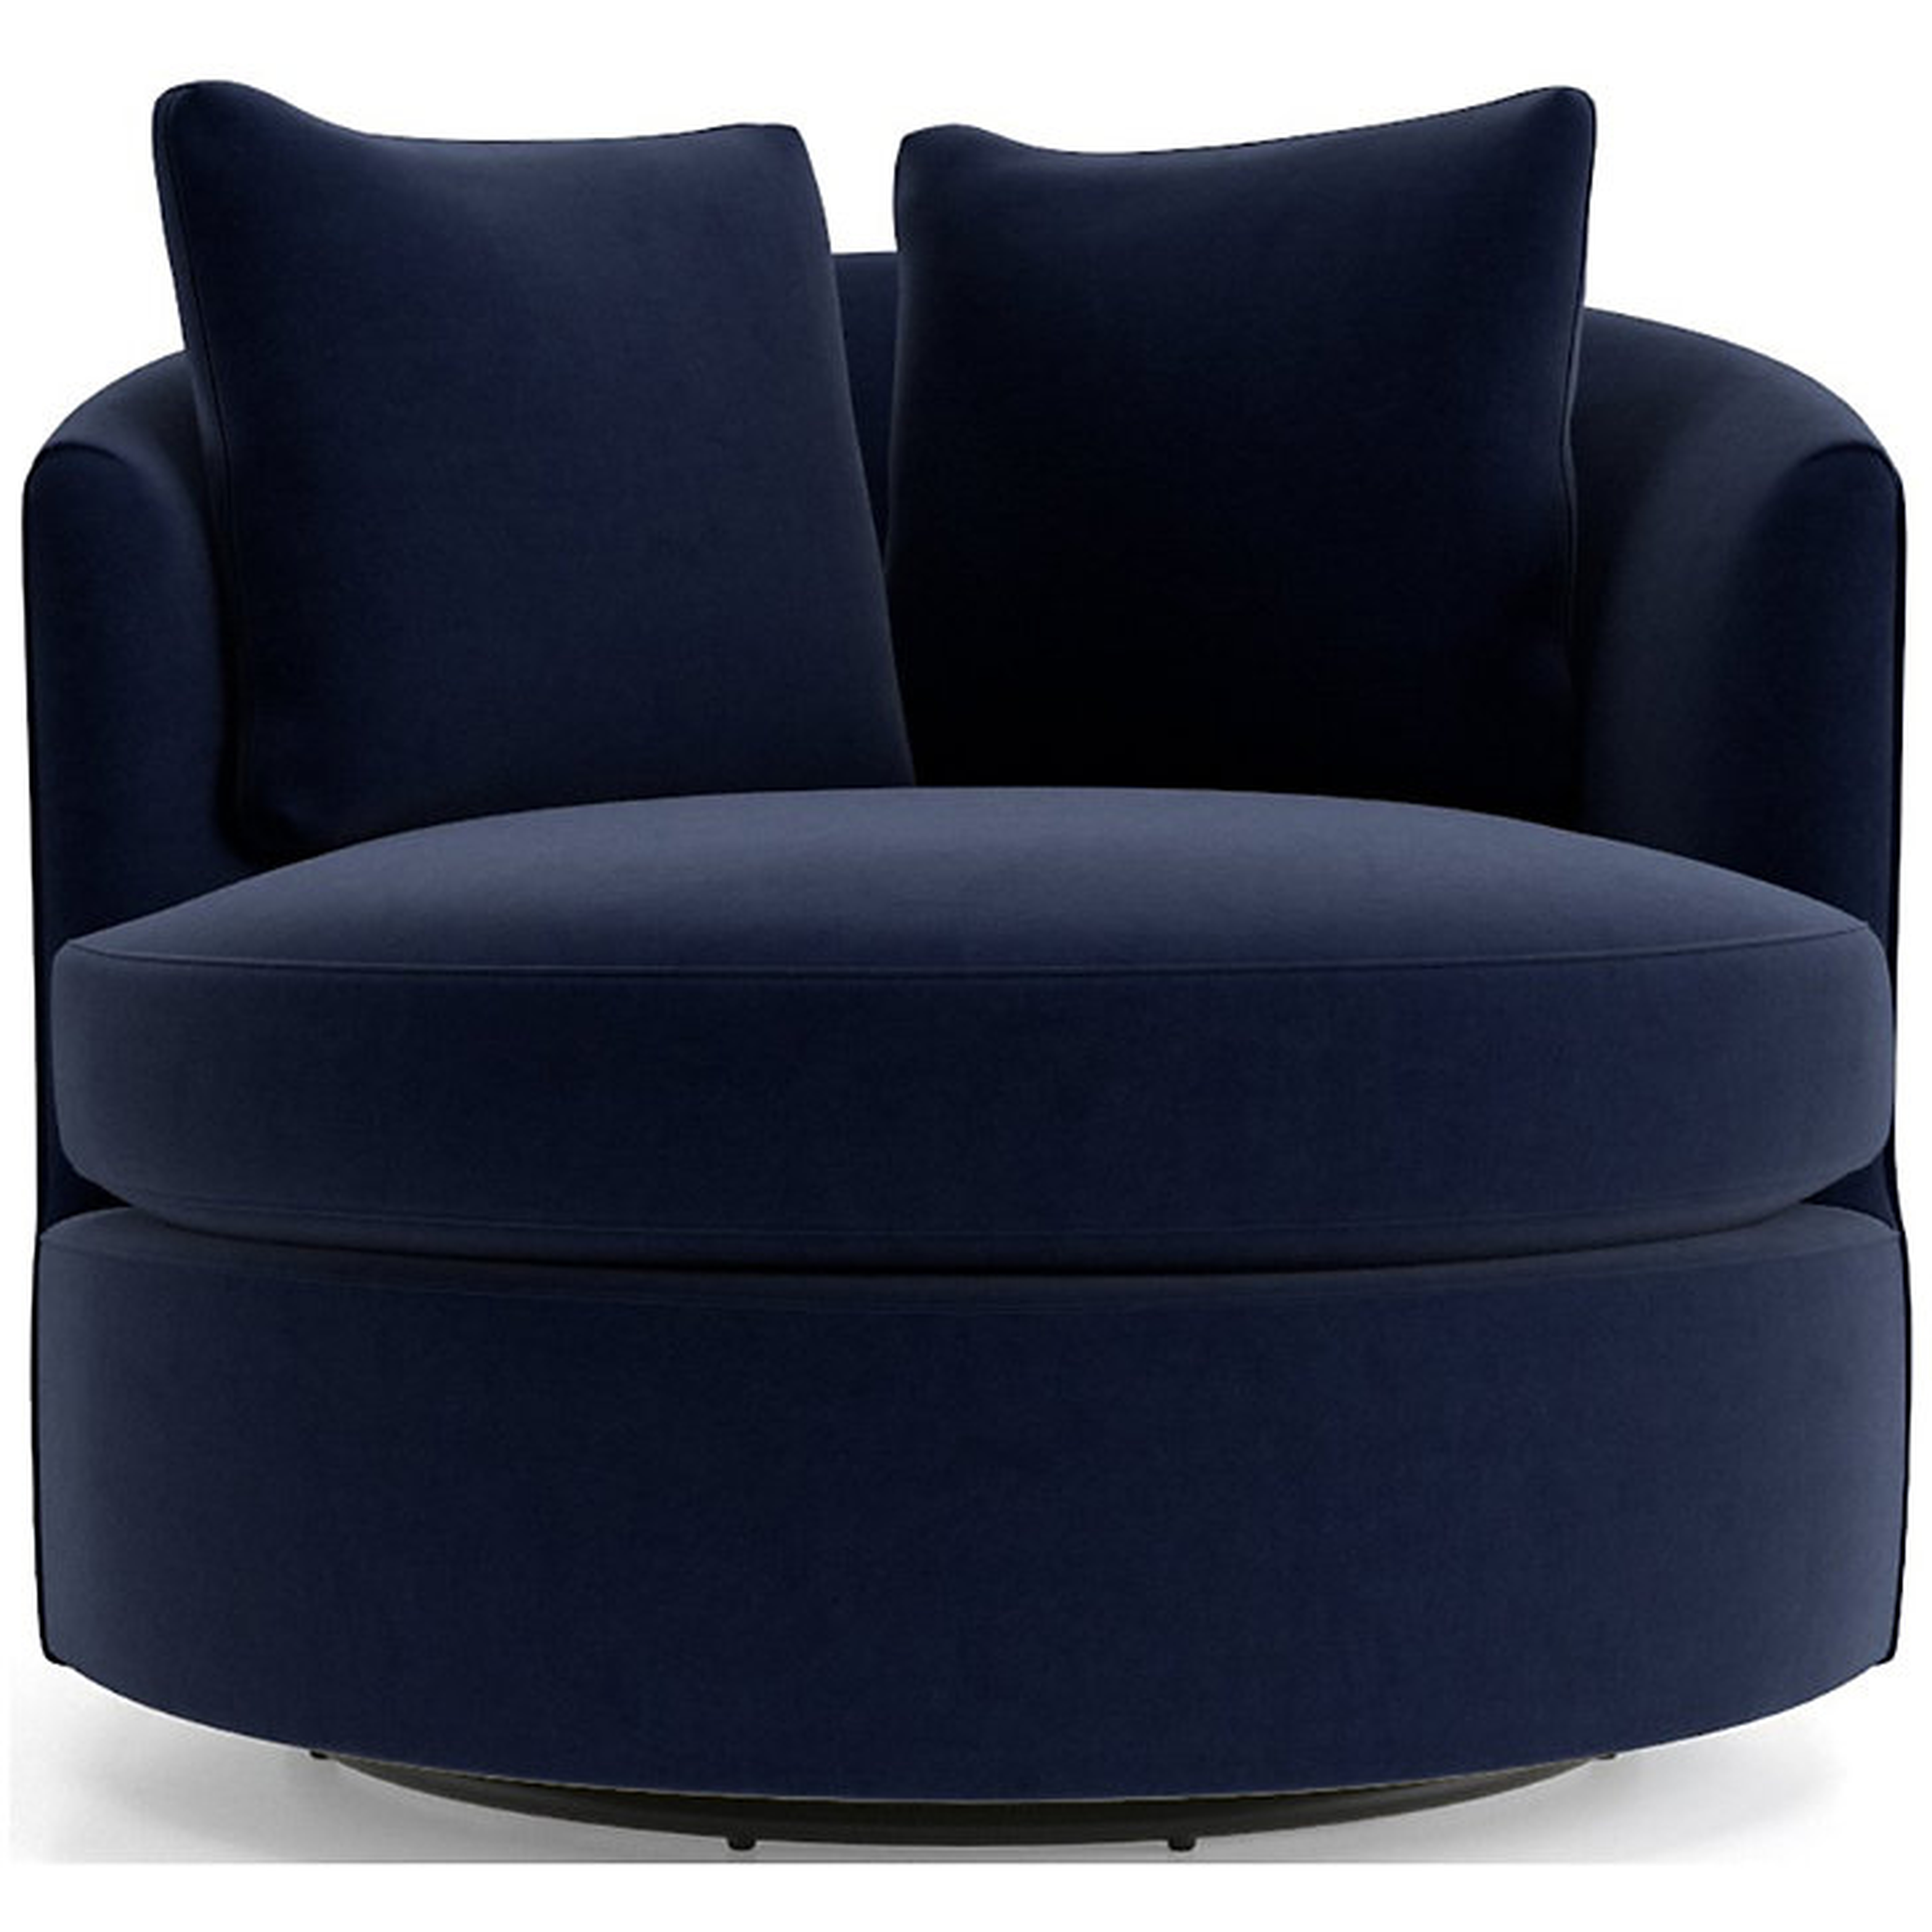 Tillie Swivel Chair - Crate and Barrel